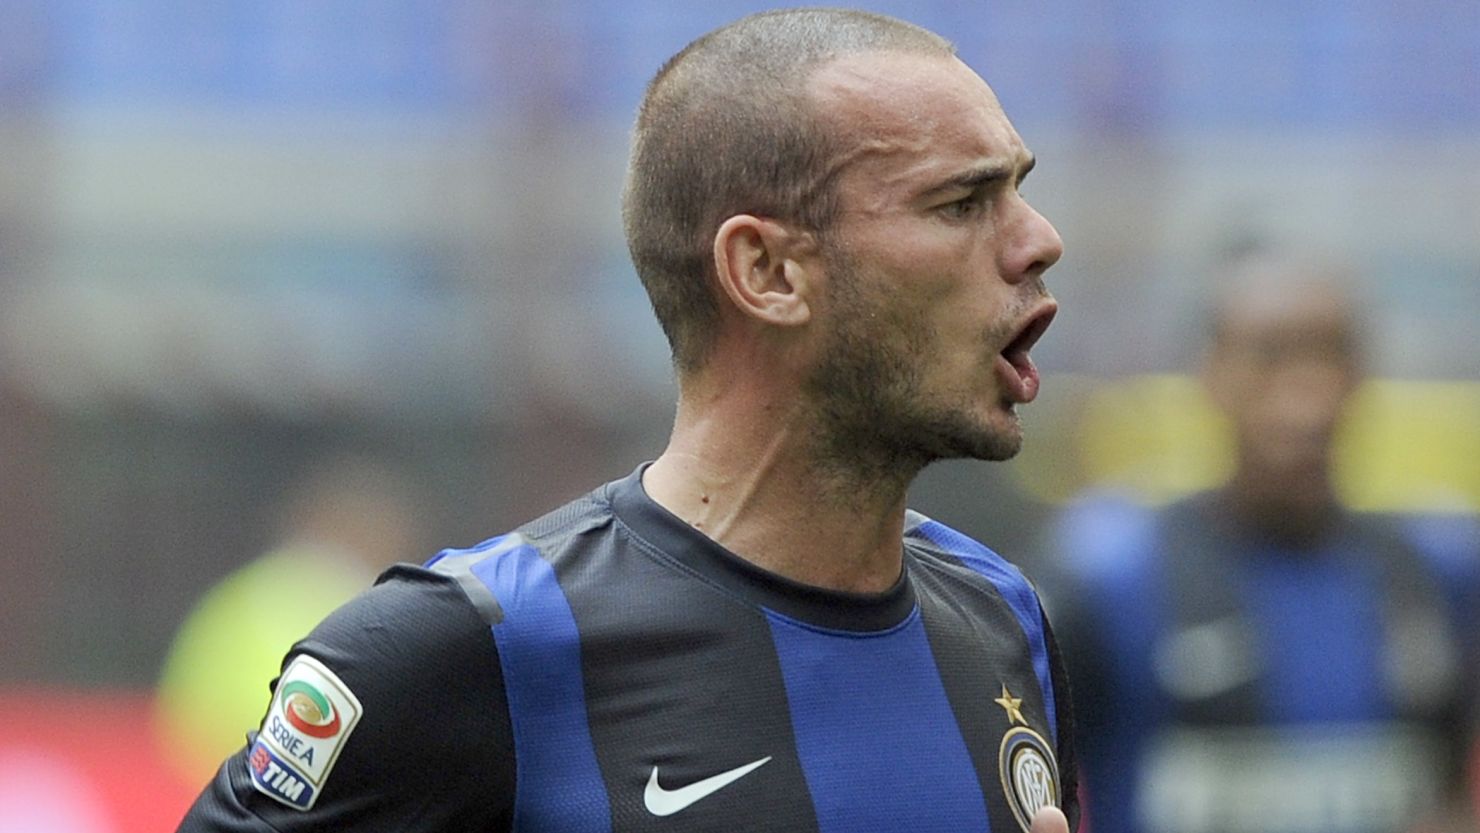 Inter Milan will not allow Wesley Sneijder to play again until he agrees to a "contract adjustment."